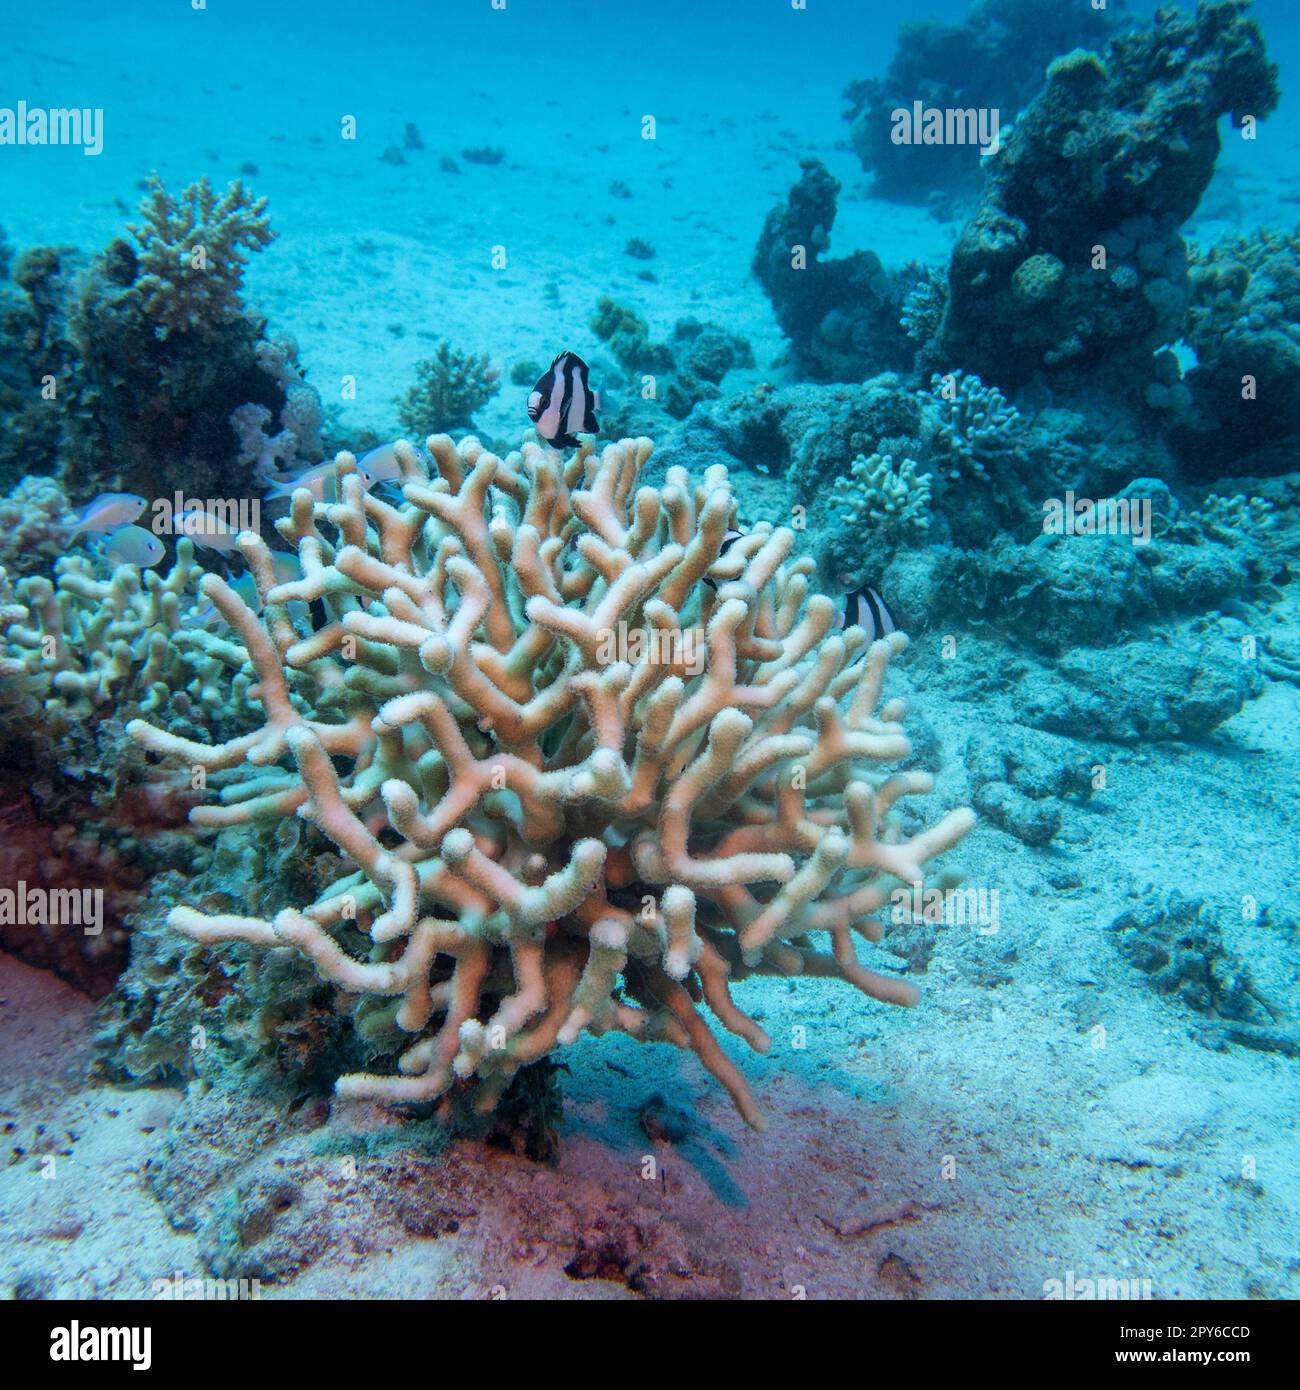 Colorful, picturesque coral reef at sandy bottom of tropical sea, stony coral and fishes dascyllus, underwater landscape Stock Photo